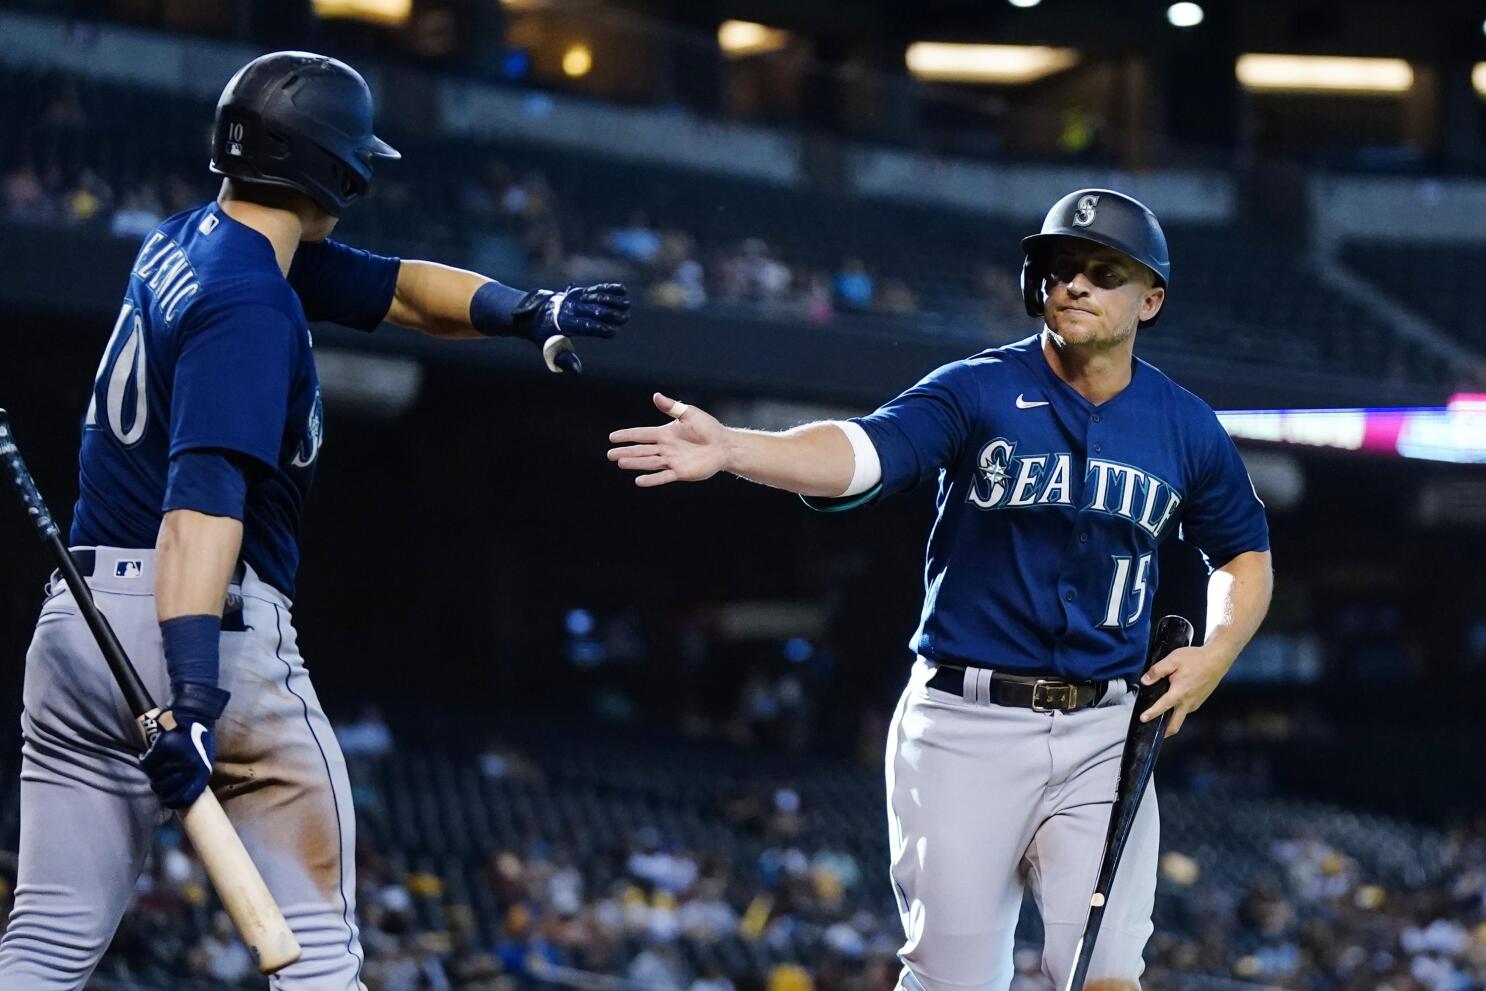 Seager's double keys 11th inning rally, Mariners top D-backs